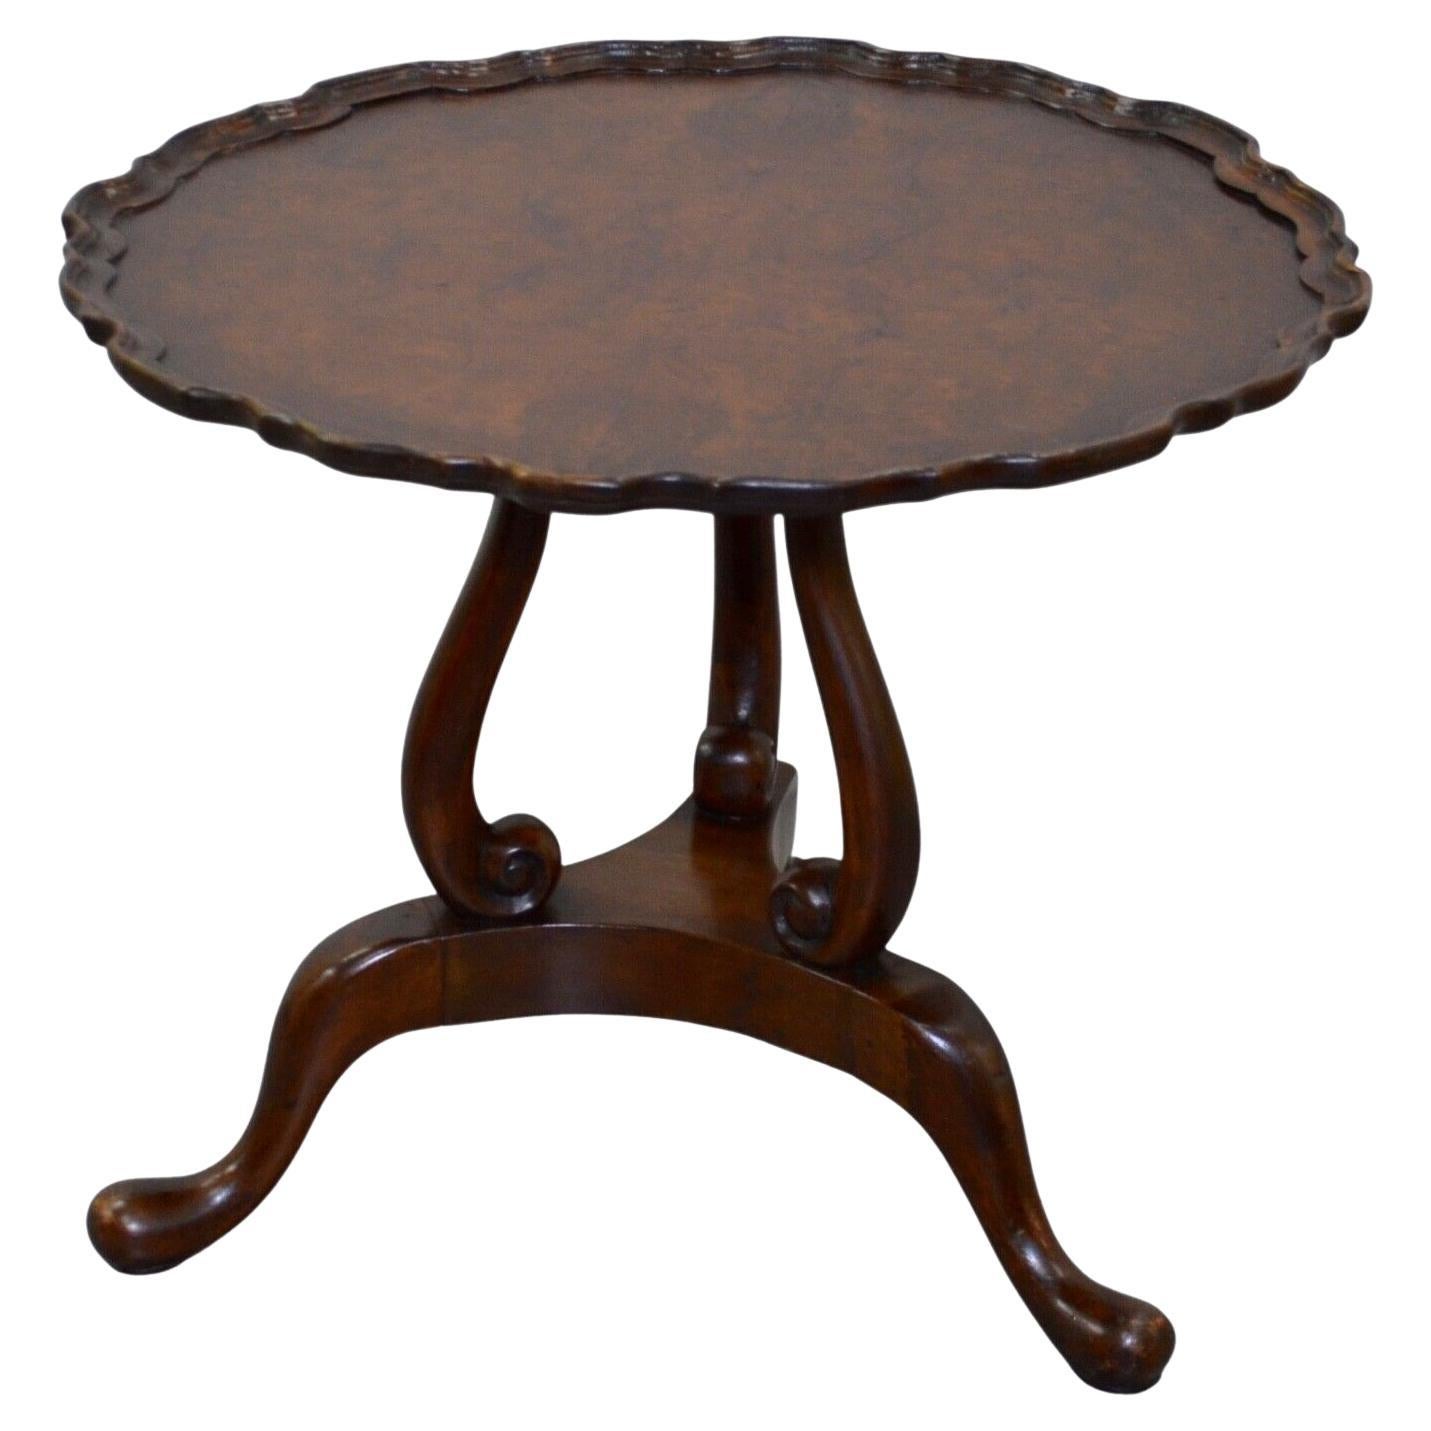 GEORGIAN REVIVIAL BURR-WALNUT OCCASiONAL COFFEE LAMP TABLE For Sale